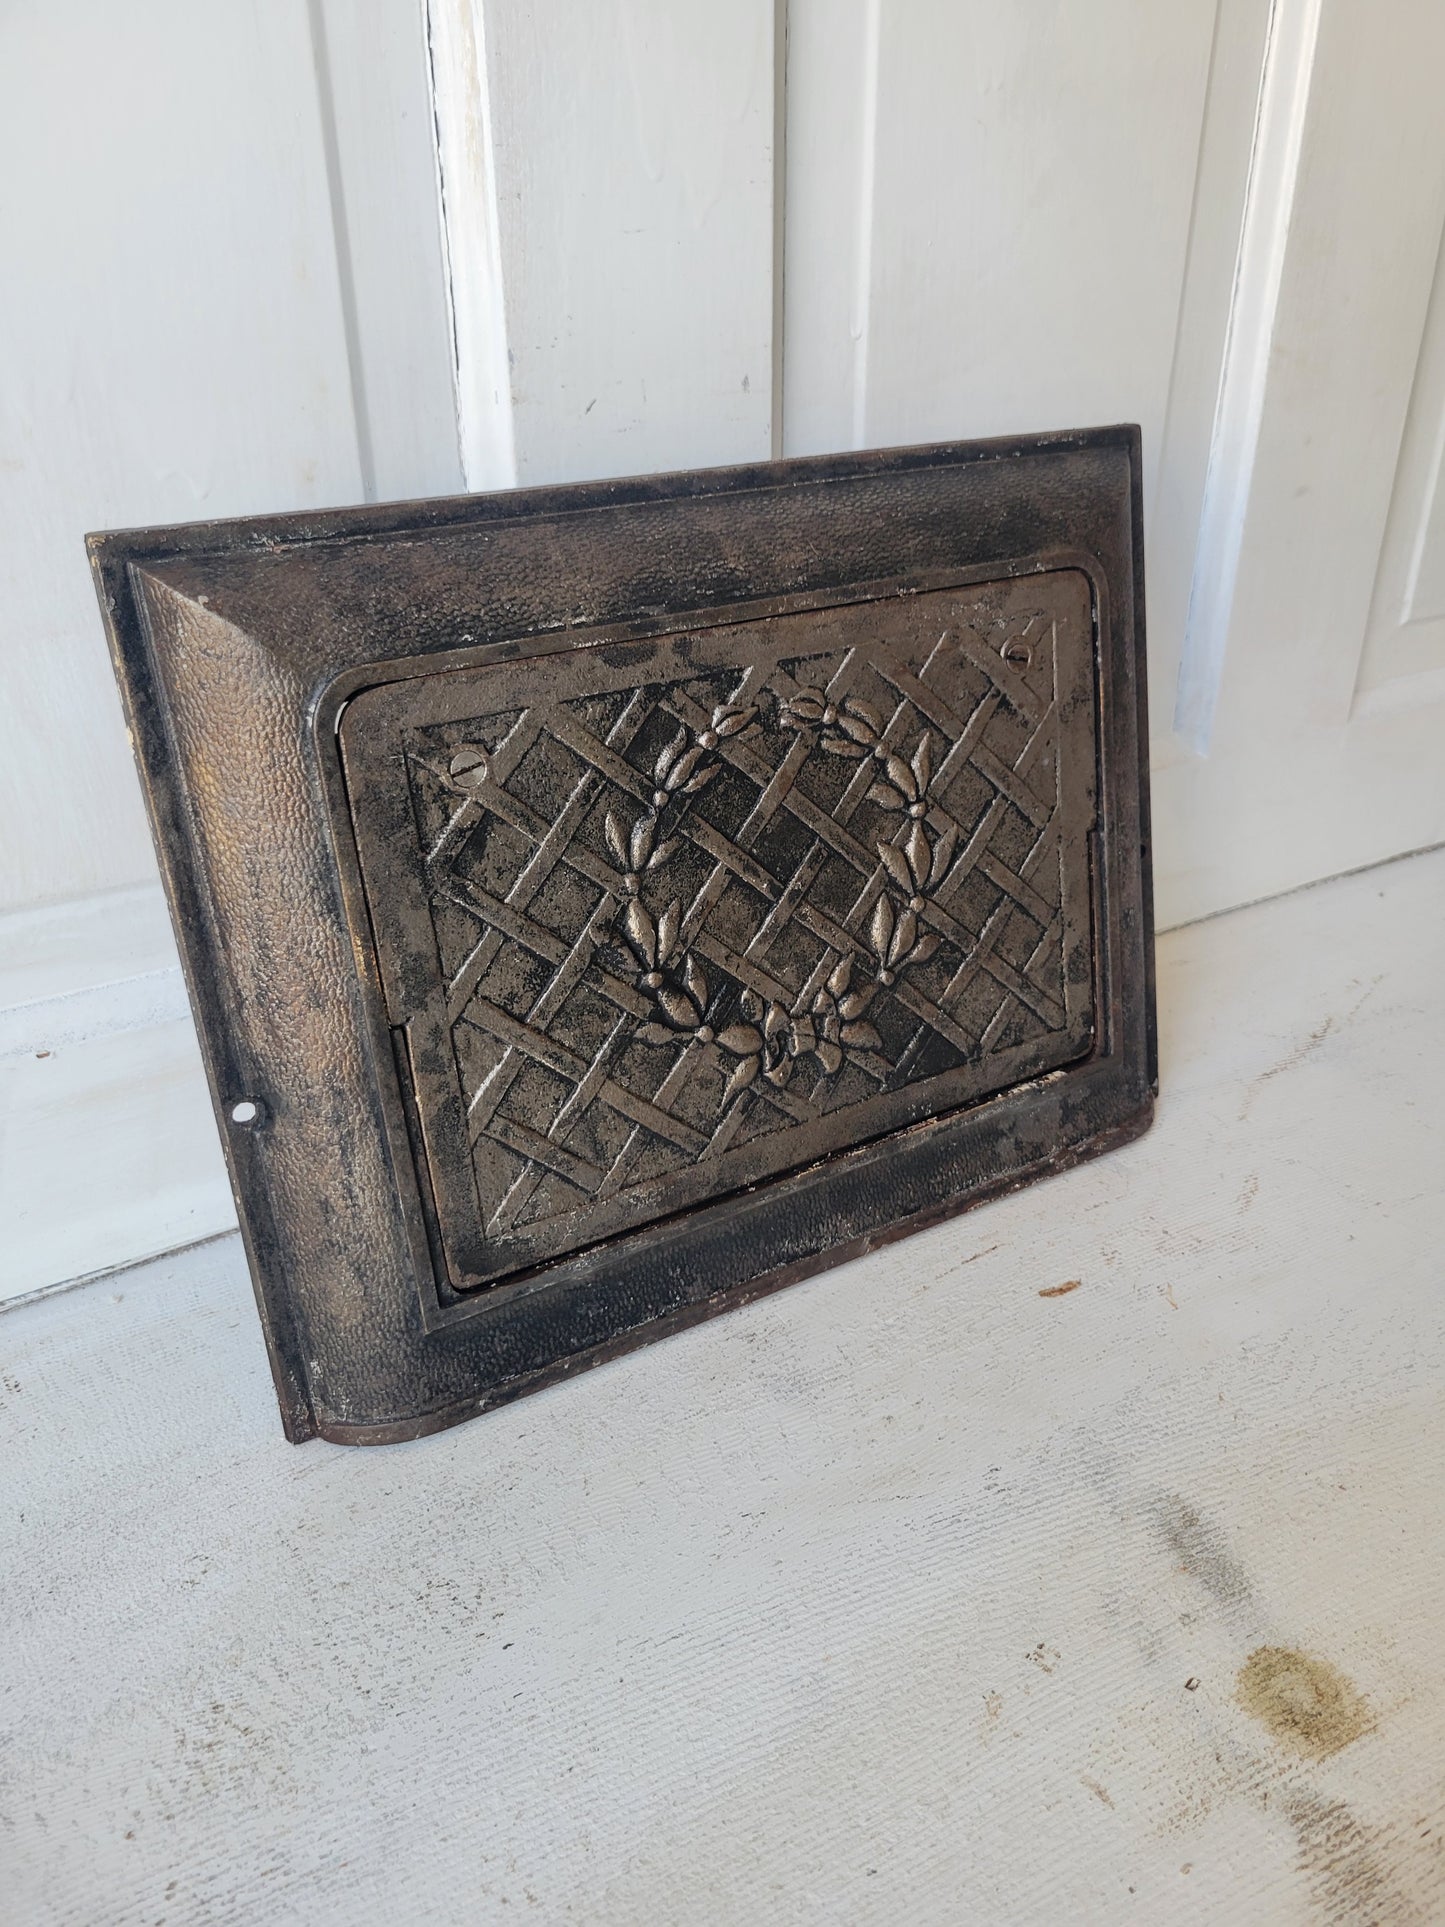 10 x 14 Fancy Cast Iron Fold Out Vent Cover, Antique Floor Register Cover with Dampers #072901